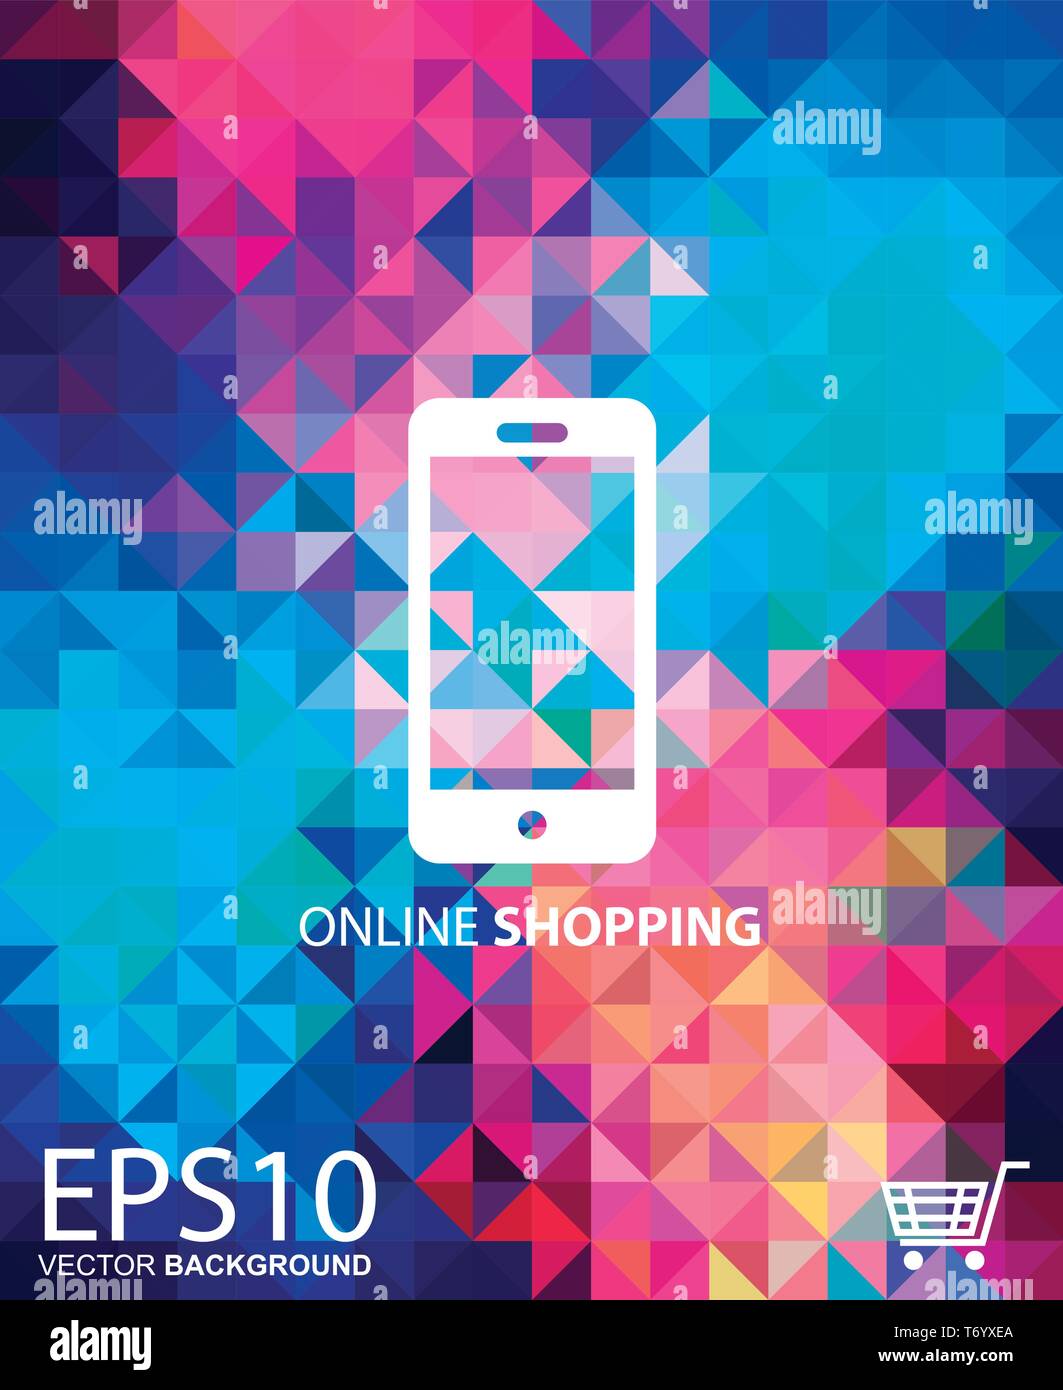 Mobile online shopping with colorful background Stock Vector